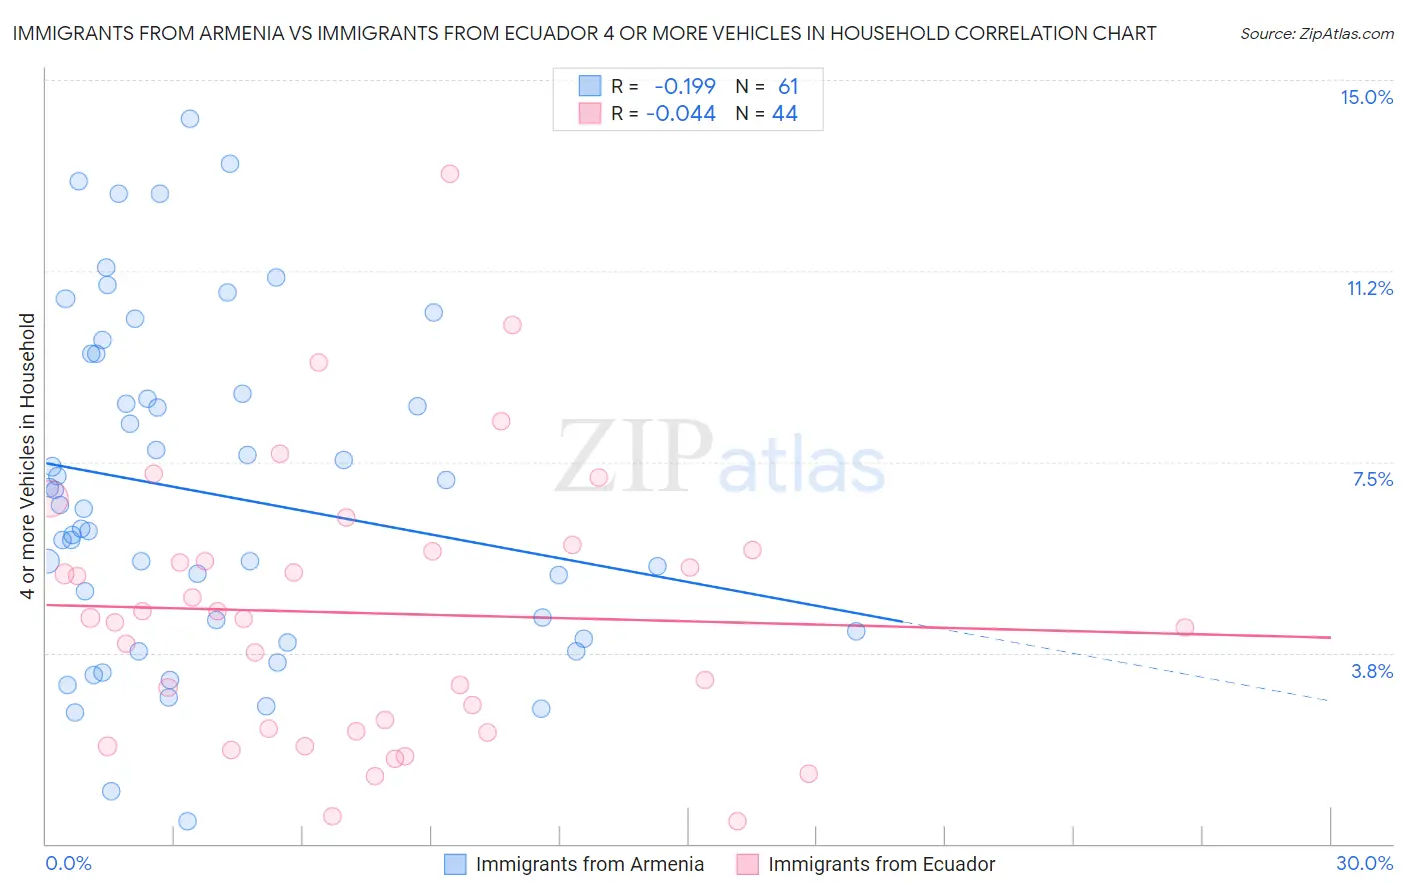 Immigrants from Armenia vs Immigrants from Ecuador 4 or more Vehicles in Household